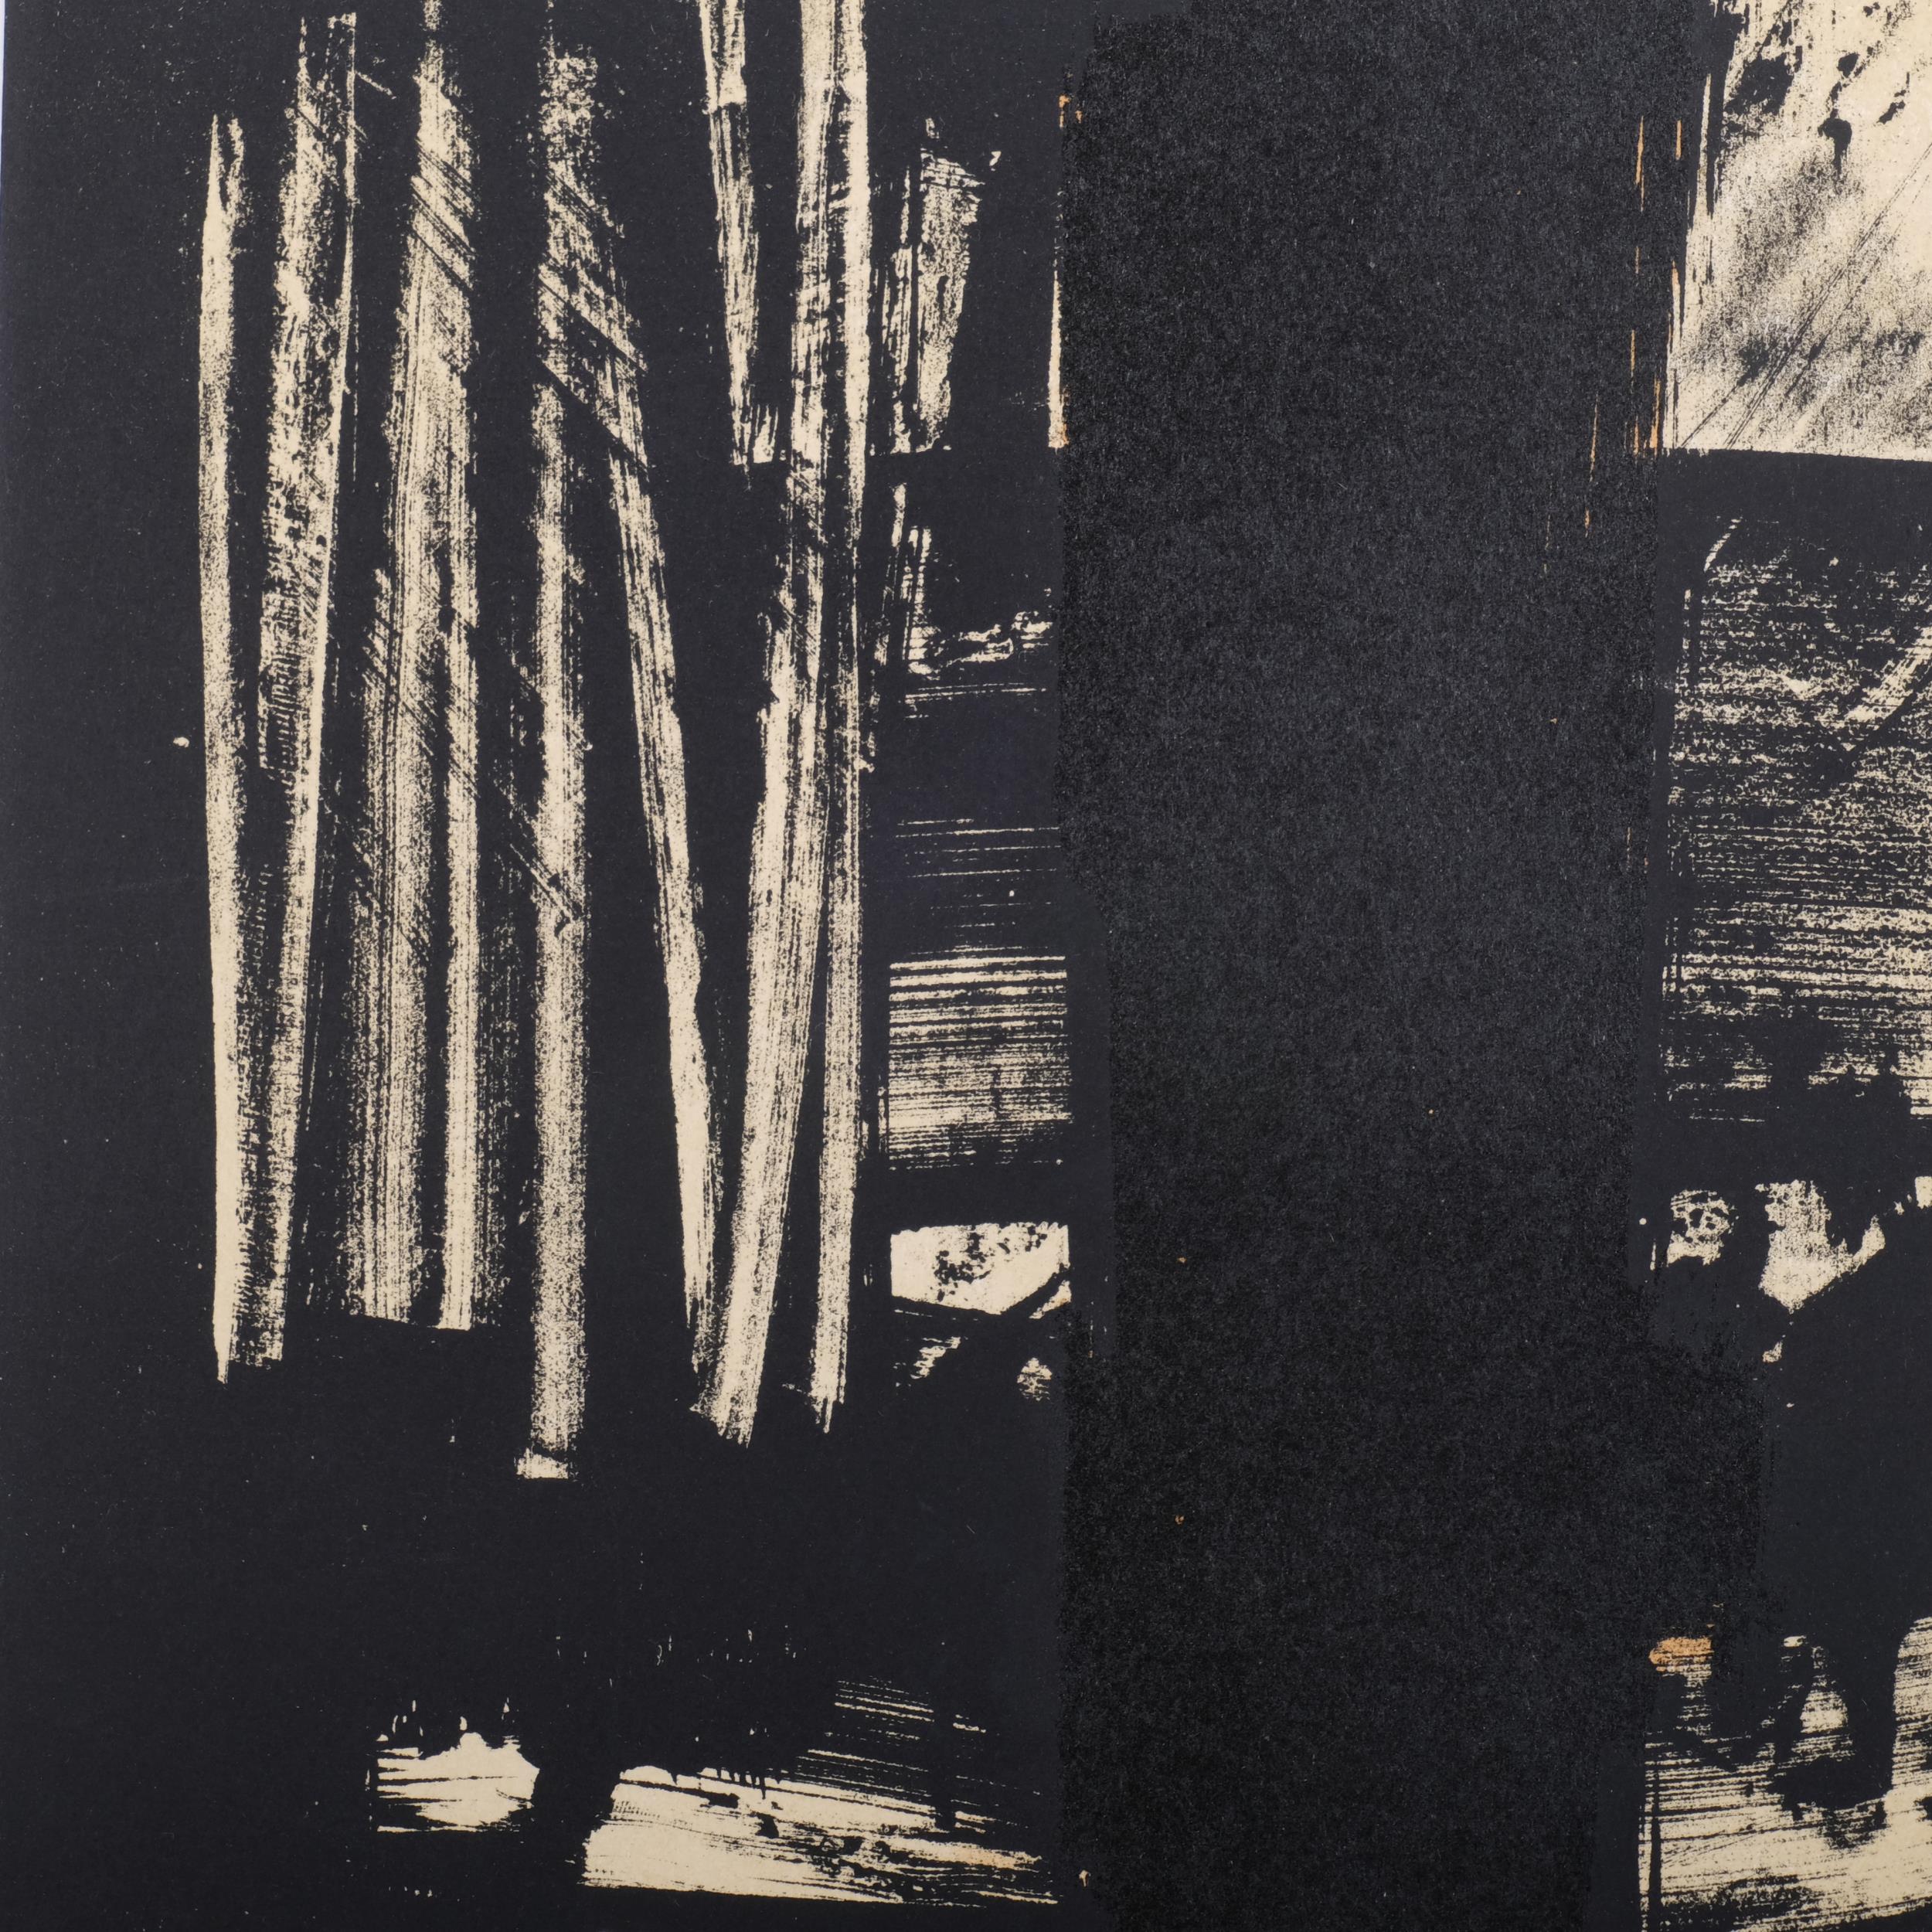 Pierre Soulages, abstract, lithograph no. 9, issued XX Siecle 1959, 30cm x 23cm, framed Good - Bild 3 aus 4